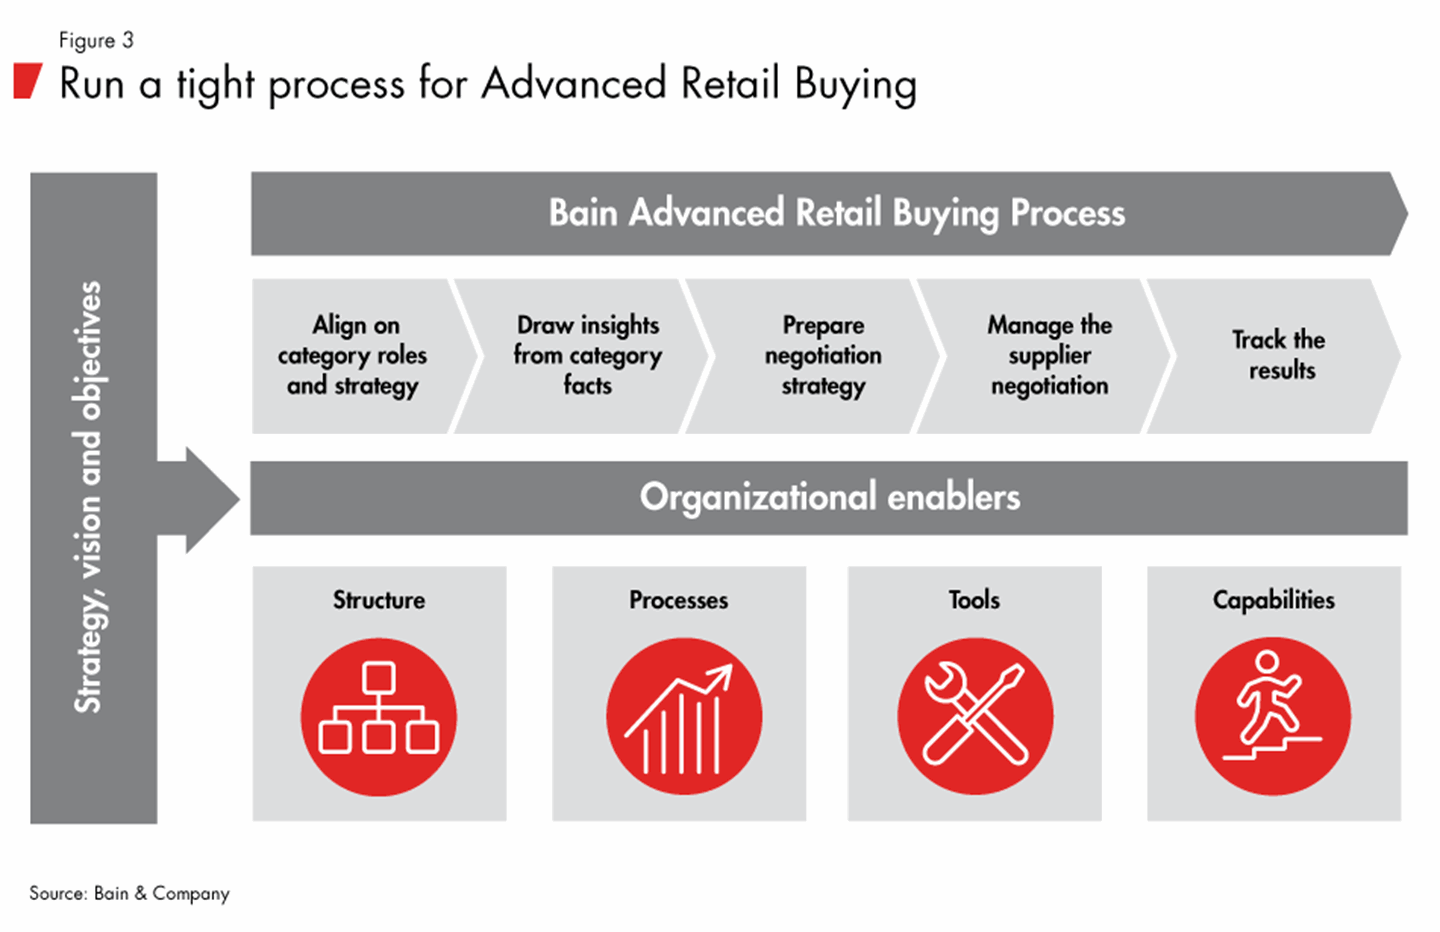 Run a tight process for Advanced Retail Buying